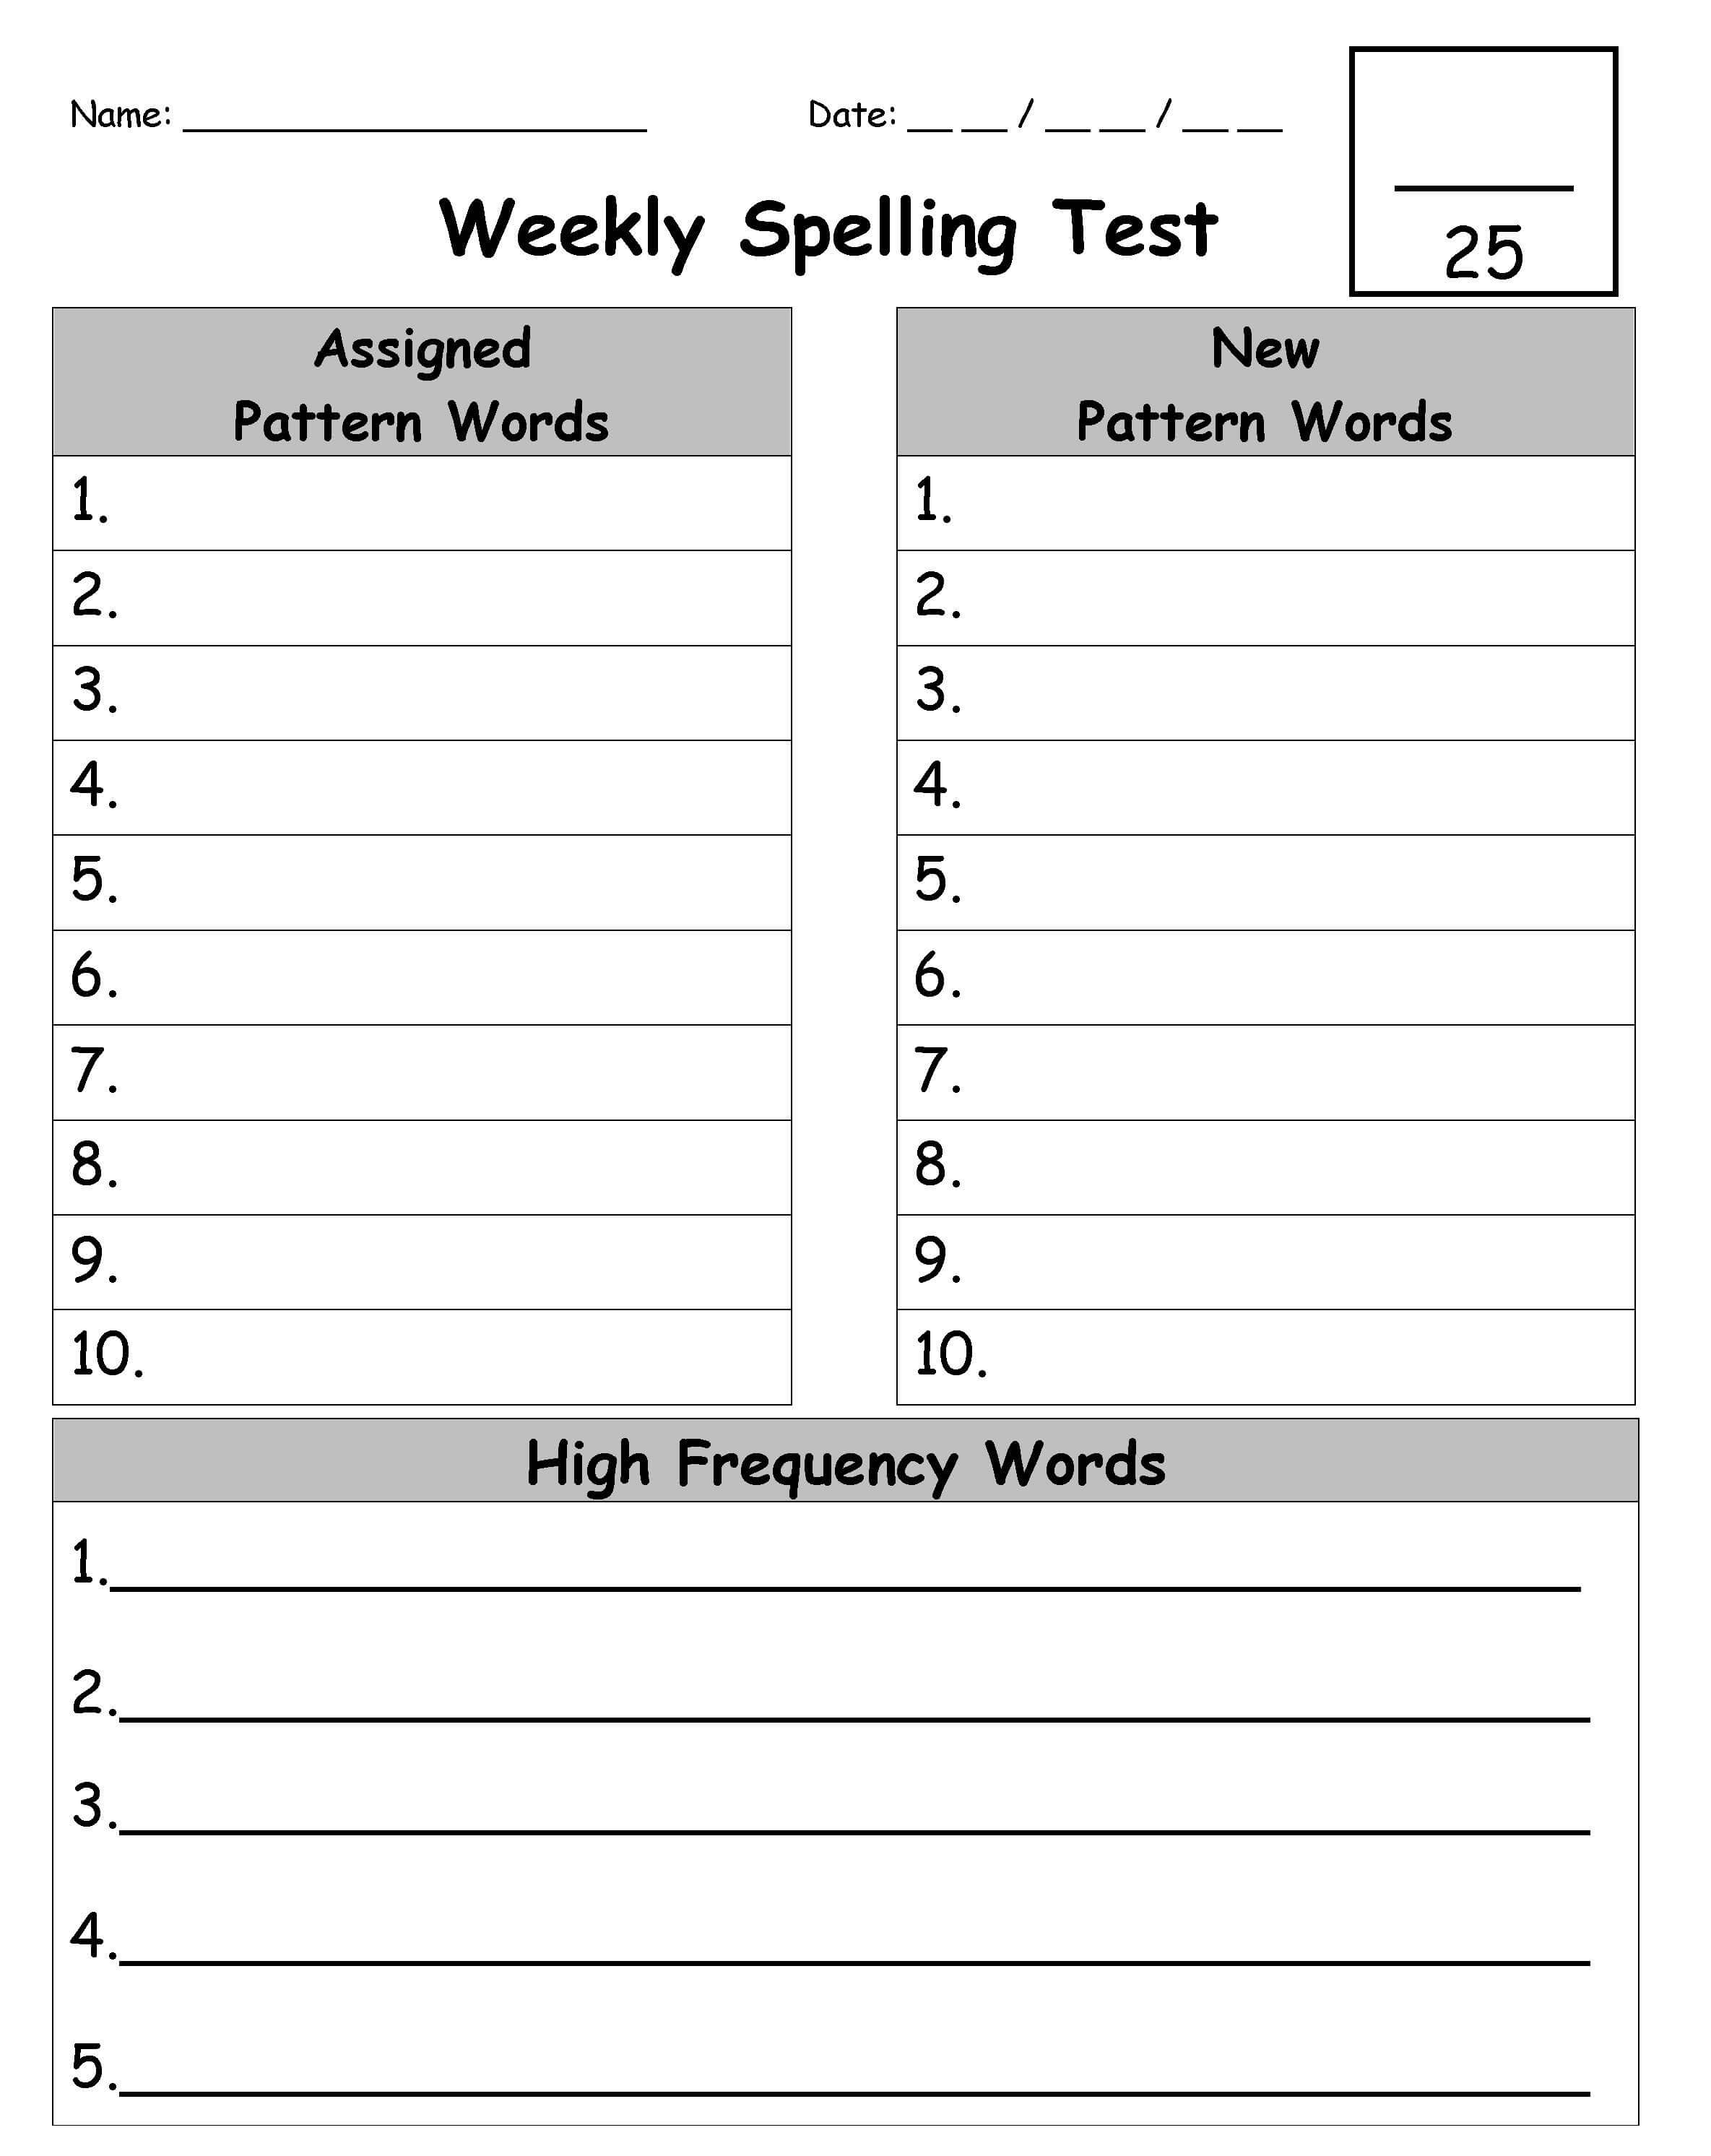 Pin On Edudeas: Spelling Intended For Test Template For Word